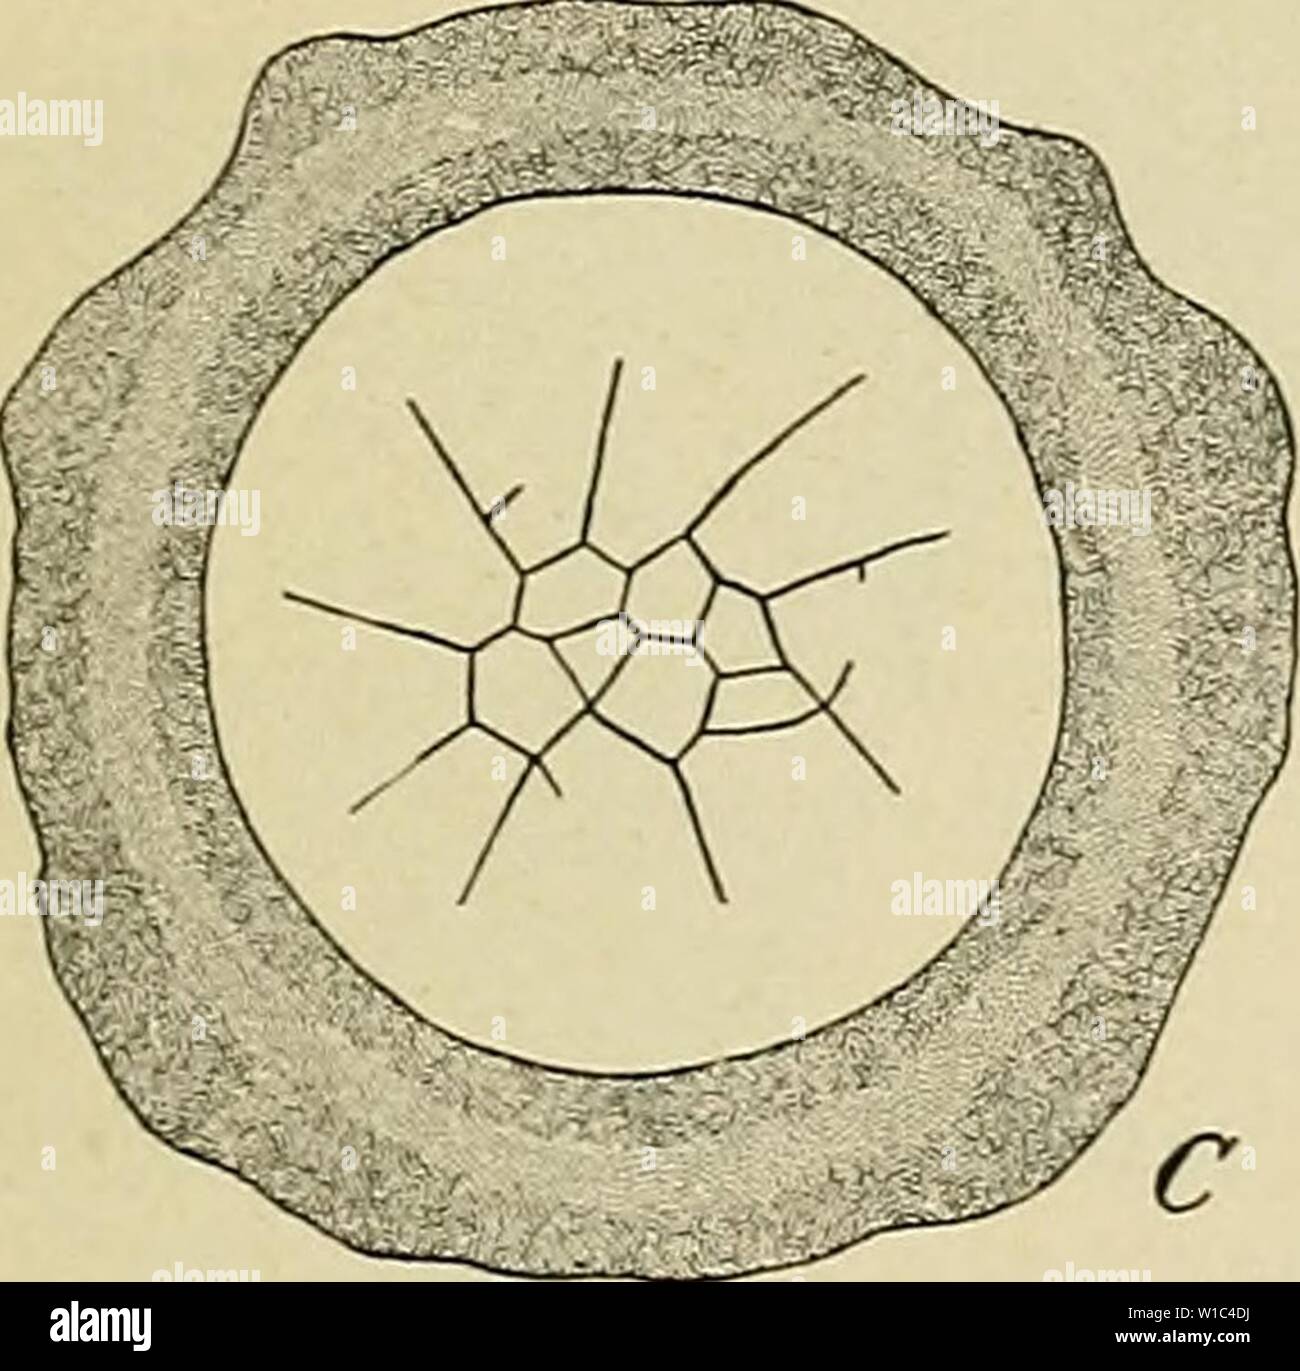 Archive image from page 52 of The development of the human. The development of the human body : a manual of human embryology . developmentofhum00mcmu Year: 1914 Stock Photo